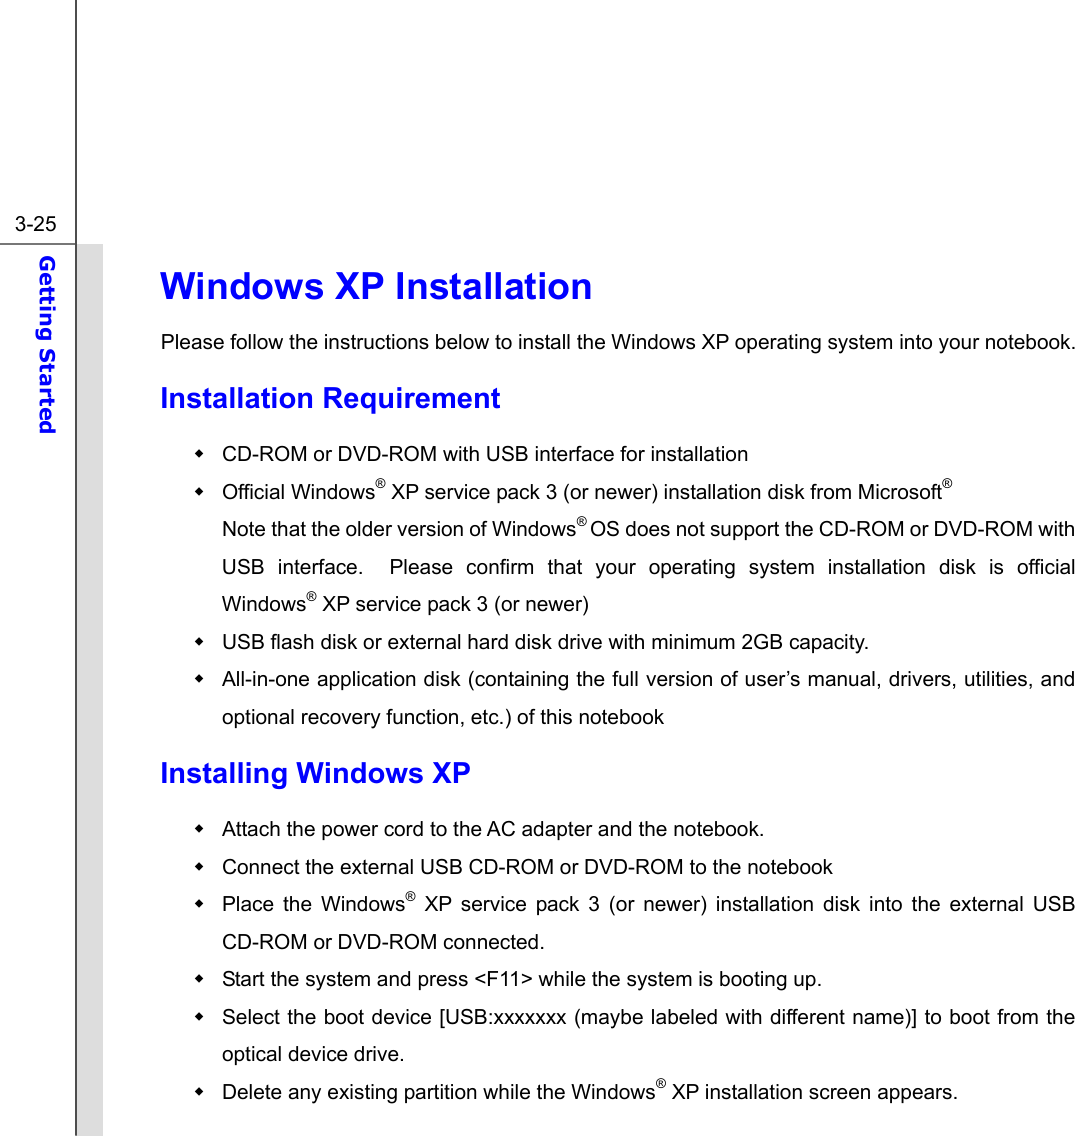  3-25 Getting Started  Windows XP Installation Please follow the instructions below to install the Windows XP operating system into your notebook. Installation Requirement   CD-ROM or DVD-ROM with USB interface for installation  Official Windows® XP service pack 3 (or newer) installation disk from Microsoft®   Note that the older version of Windows® OS does not support the CD-ROM or DVD-ROM with USB interface.  Please confirm that your operating system installation disk is official Windows® XP service pack 3 (or newer)   USB flash disk or external hard disk drive with minimum 2GB capacity.   All-in-one application disk (containing the full version of user’s manual, drivers, utilities, and optional recovery function, etc.) of this notebook Installing Windows XP   Attach the power cord to the AC adapter and the notebook.   Connect the external USB CD-ROM or DVD-ROM to the notebook   Place the Windows® XP service pack 3 (or newer) installation disk into the external USB CD-ROM or DVD-ROM connected.   Start the system and press &lt;F11&gt; while the system is booting up.       Select the boot device [USB:xxxxxxx (maybe labeled with different name)] to boot from the optical device drive.      Delete any existing partition while the Windows® XP installation screen appears.     